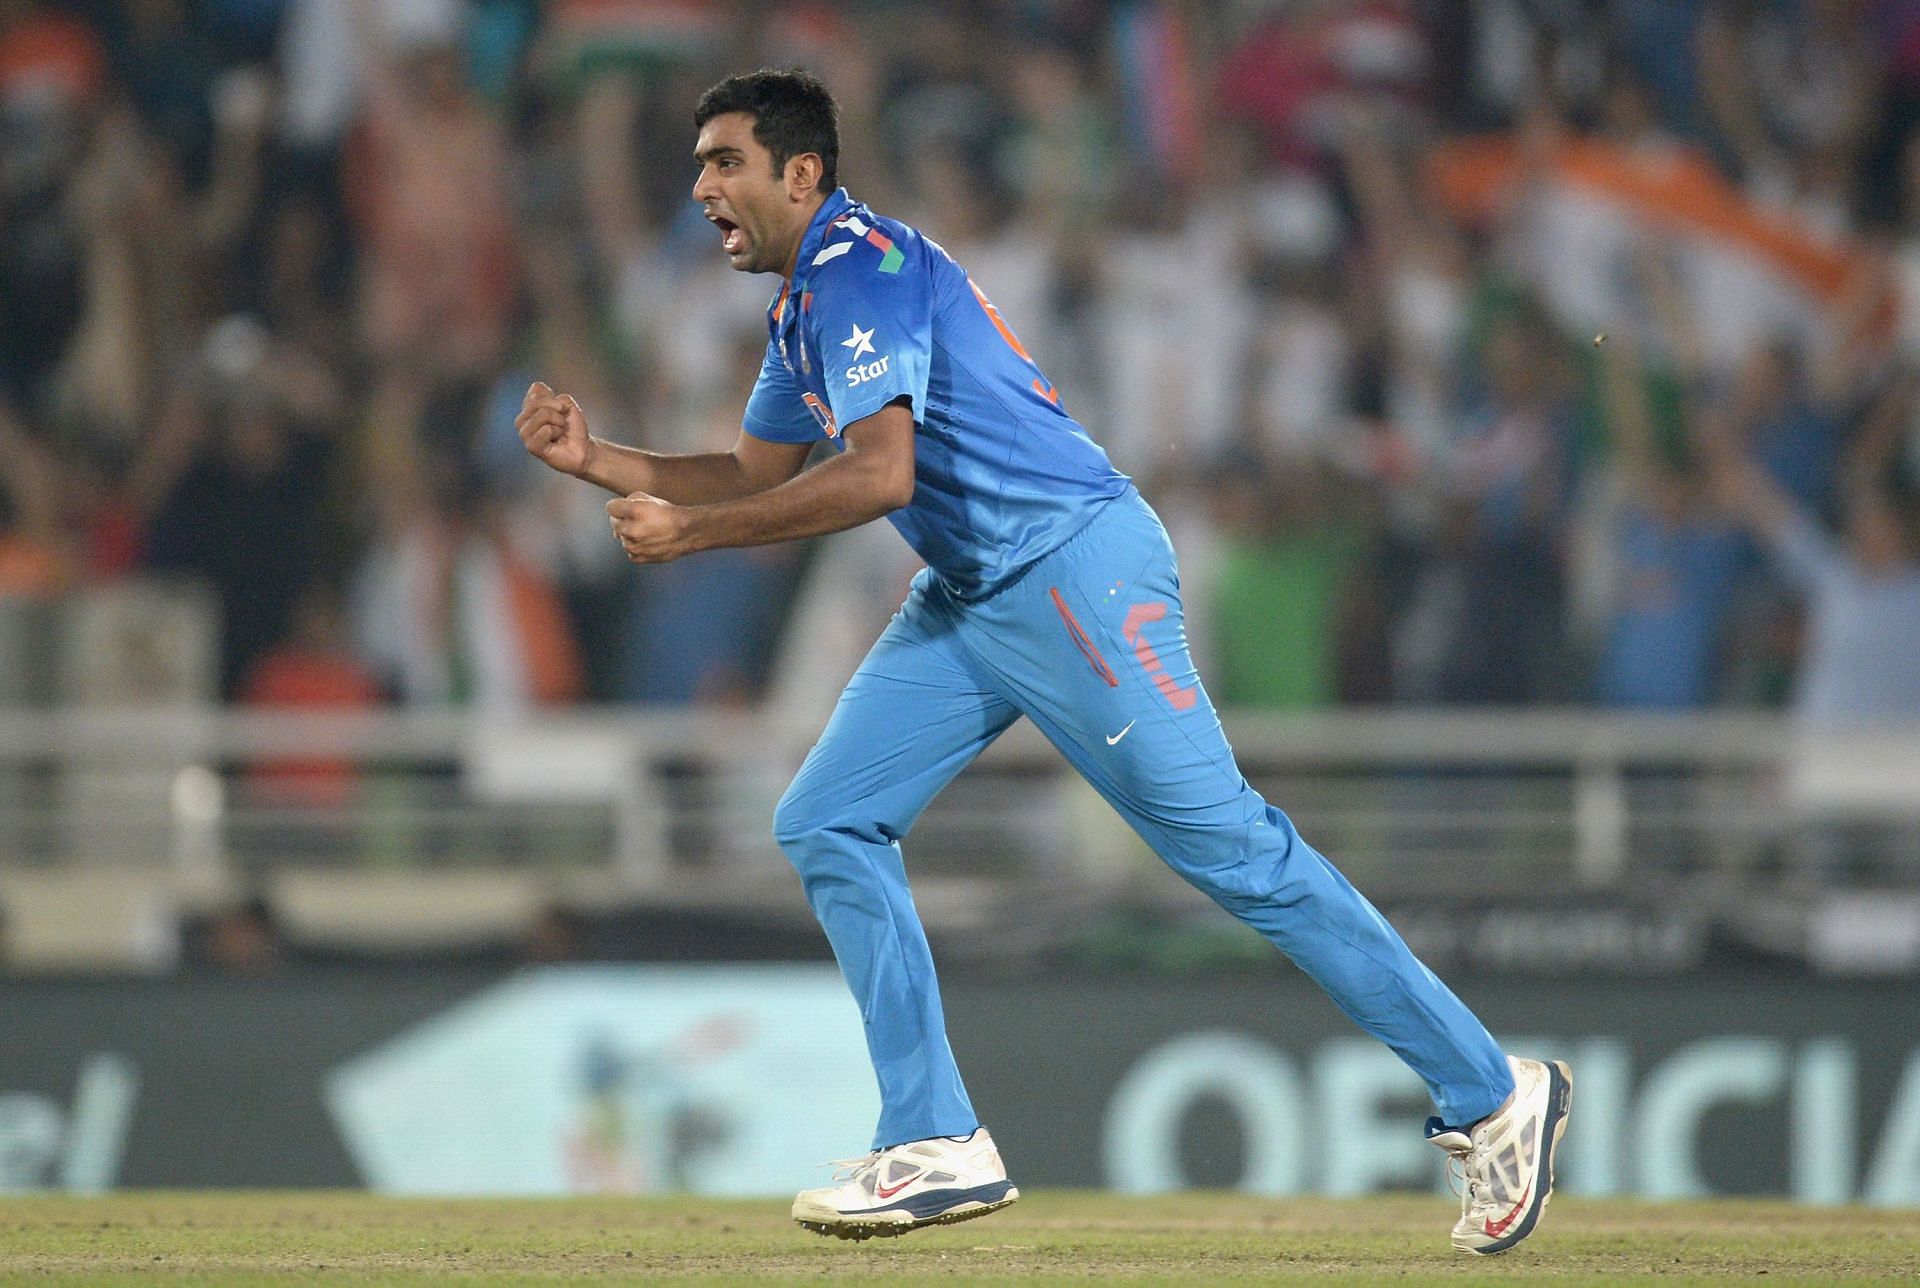 Ravichandran Ashwin celebrates after dismissing AB de Villiers during the 2014 T20 World Cup semi-final. Pic: Getty Images